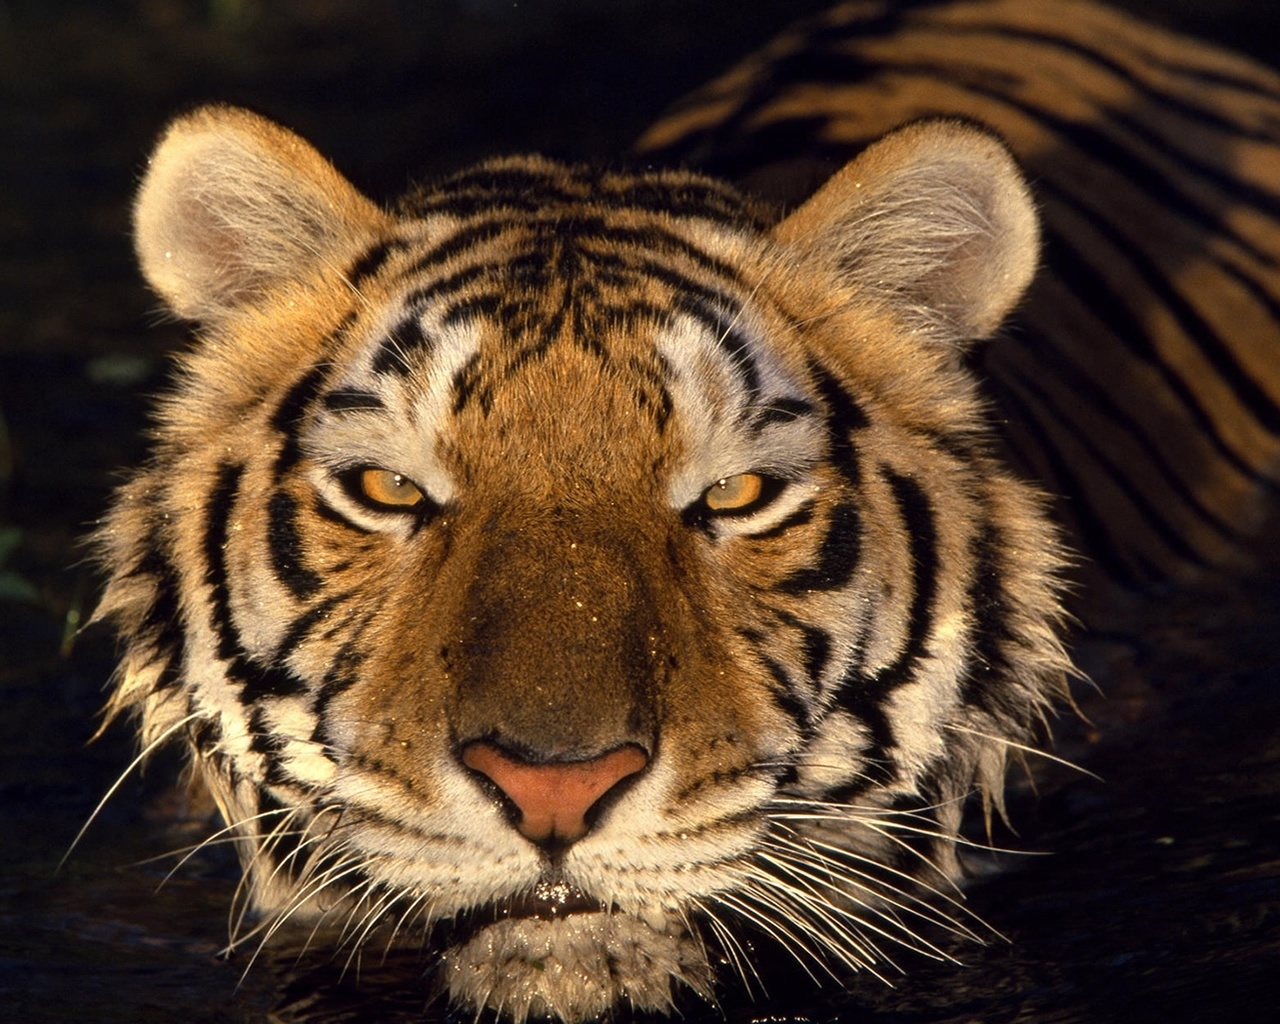 Tiger Head for 1280 x 1024 resolution